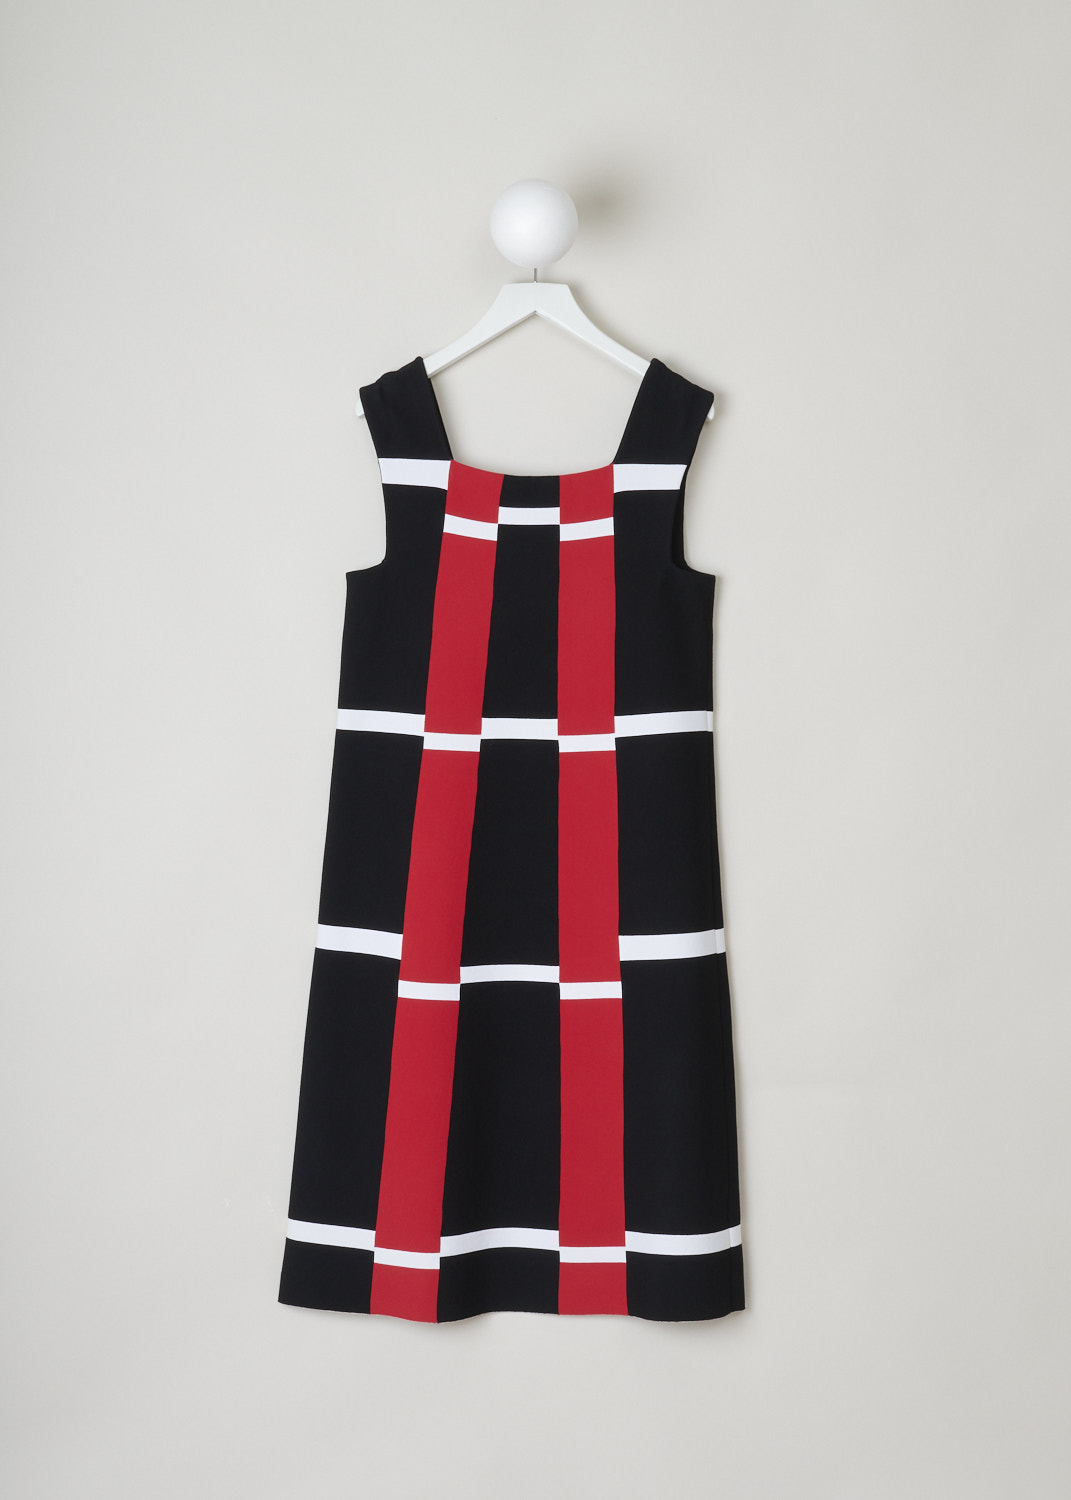 AlaÃ¯a, Mid-length a-line dress in black red and white, 7E9RI18RM327_CM93, print, back, A Knitted knee-length dress in sixties style, which is reinforced by the tri-colour combination being the black white and red. Elegant, straight neckline, with a sleeveless and slip-on design. 